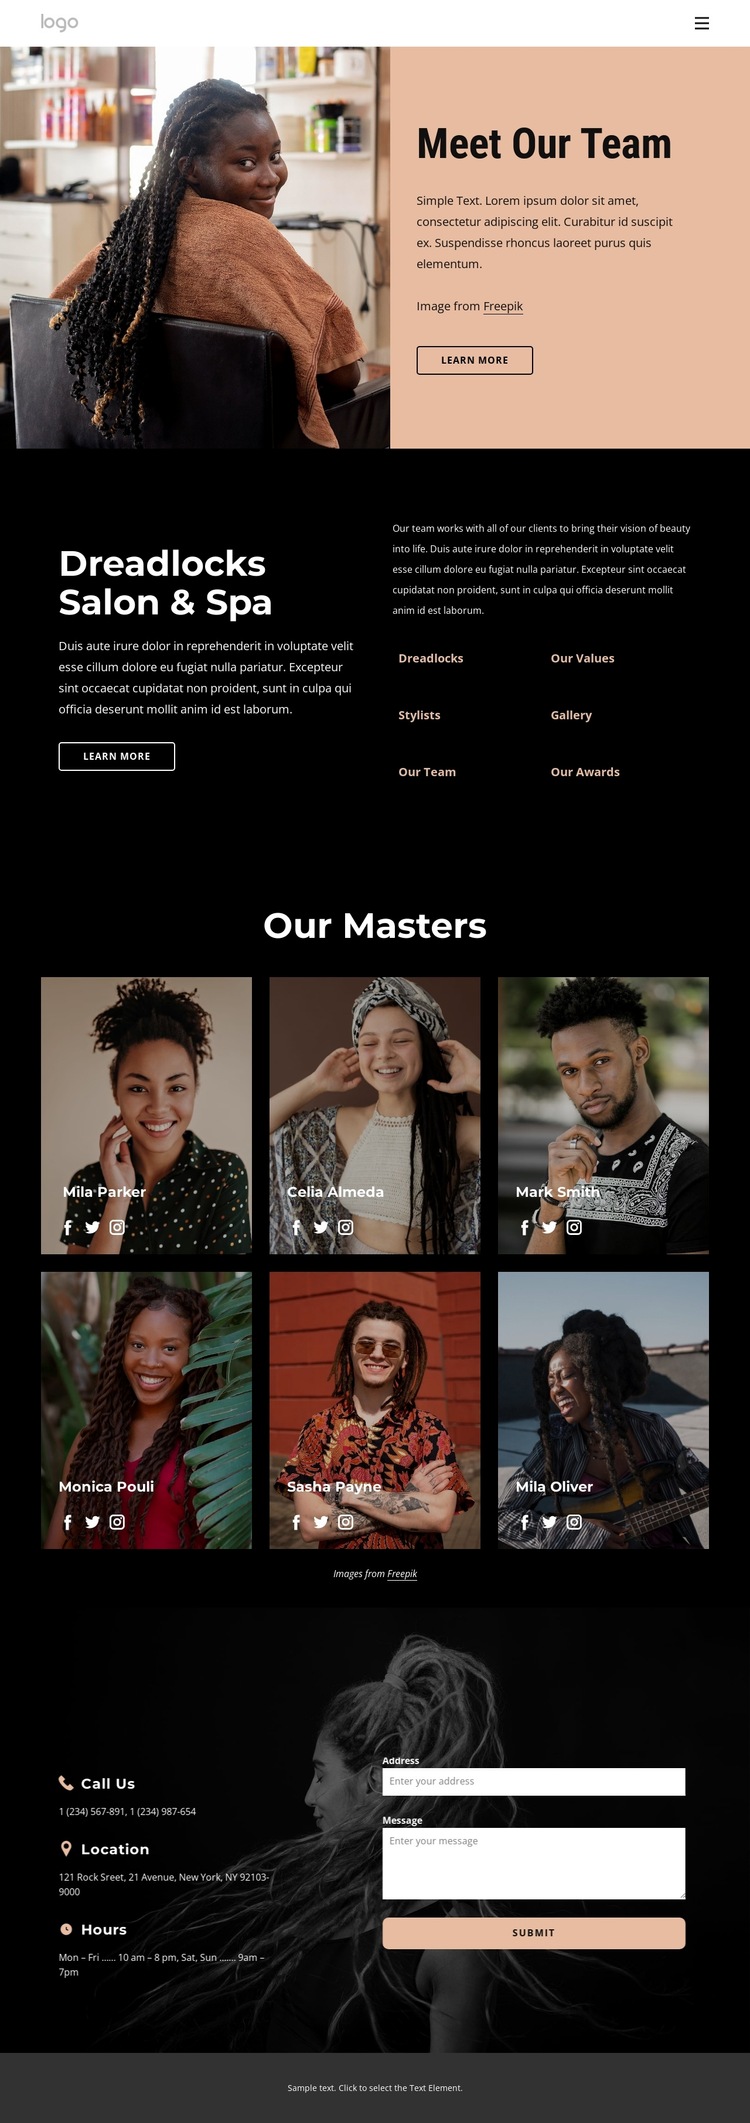 Meet our masters HTML5 Template